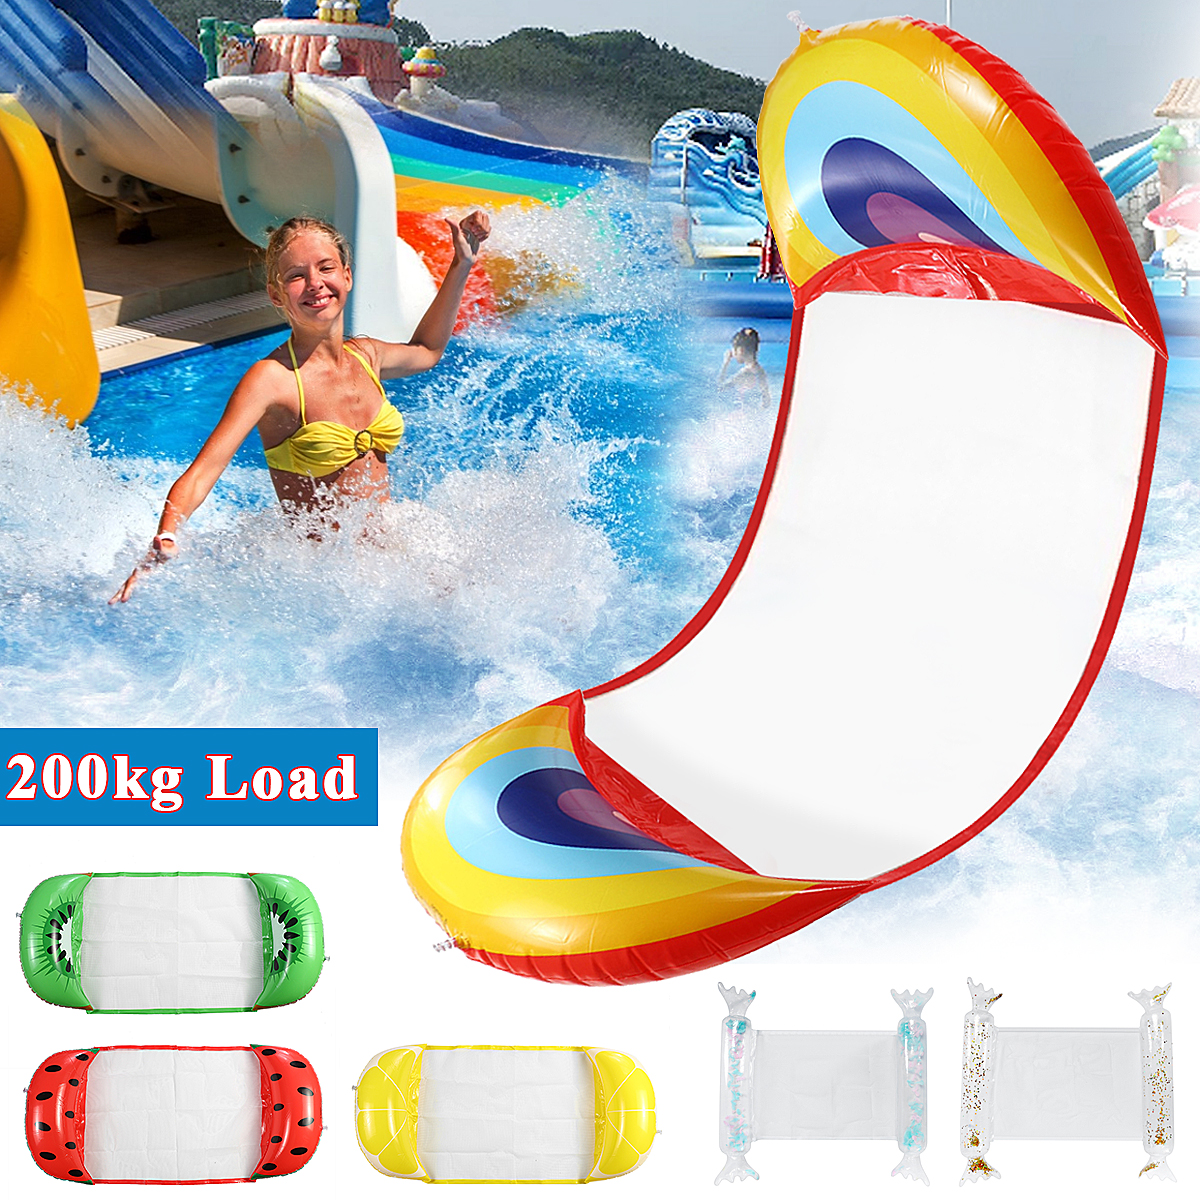 PVC-Fruit-Hammock-Floating-Bed-With-Net-Inflatable-Bed-Backrest-Durable-Portable-Adult-Water-Floatin-1856461-2